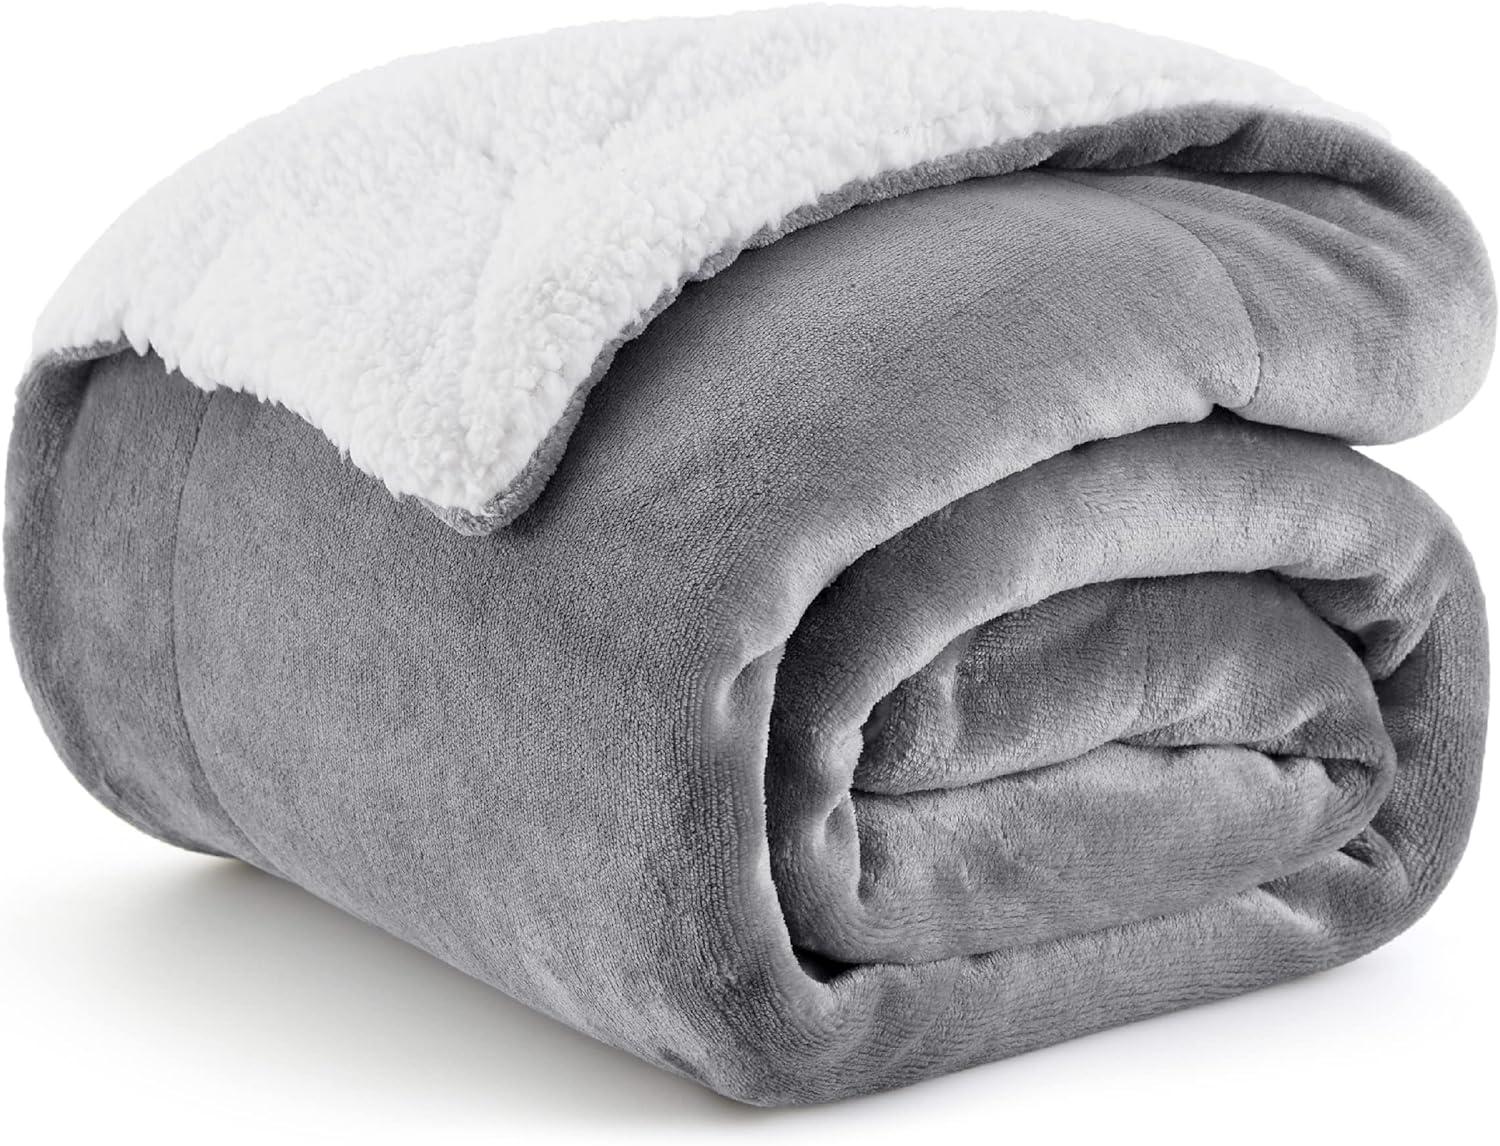 Bedsure Sherpa Fleece Throw Blanket Twin Size for Couch for $23.99